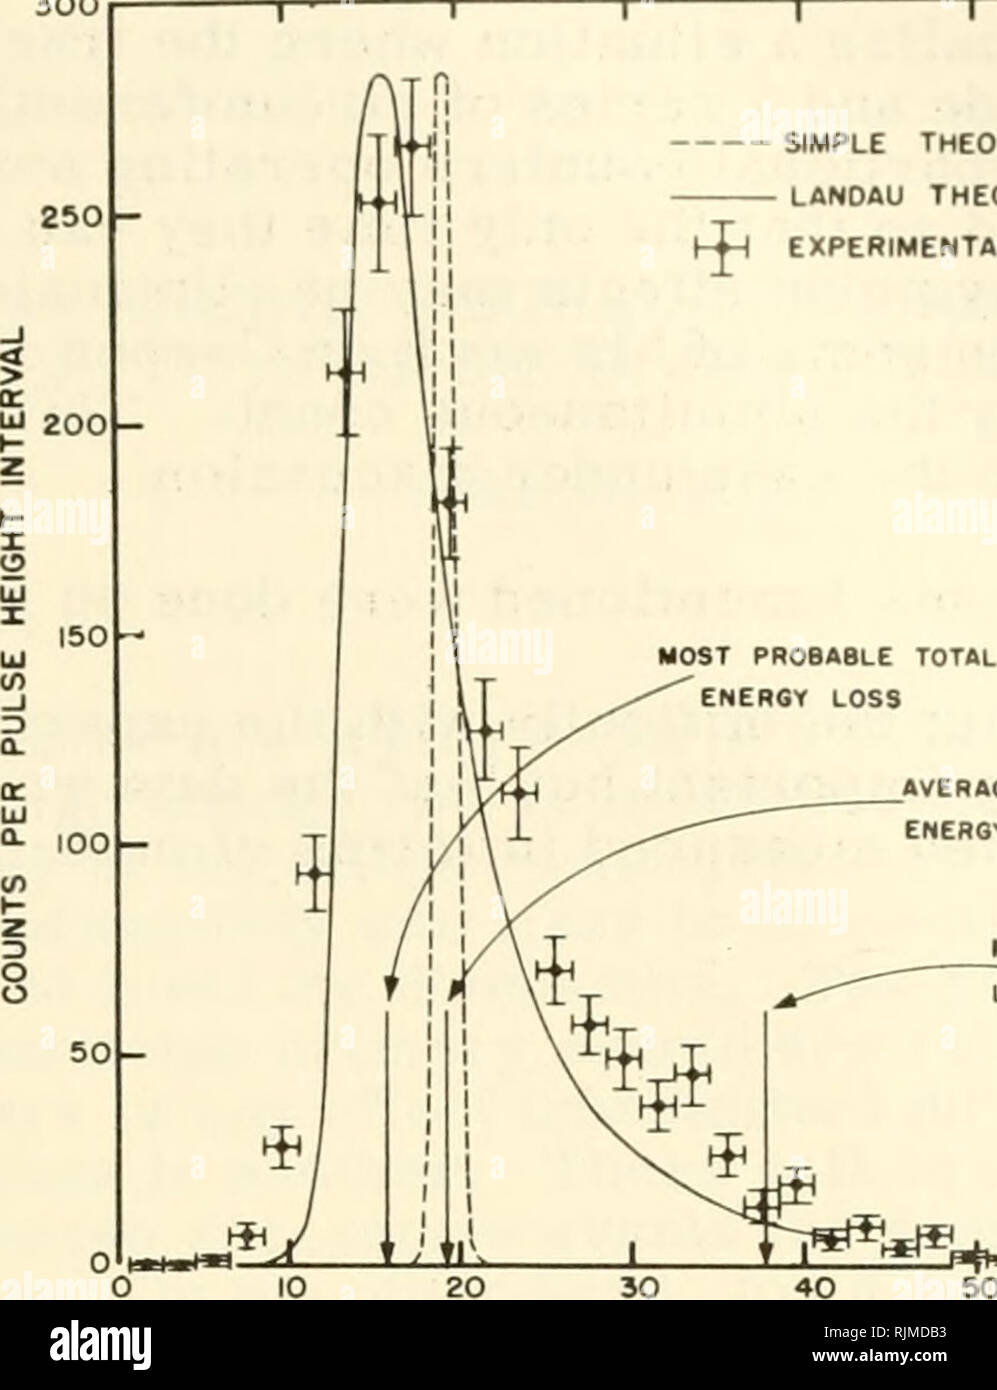 . Basic mechanisms in radiobiology II. physical and chemical aspects. proceedings of an informal conference held at Highland Park, Illinois, May 7-9, 1953. Radiobiology; Radiation Effects. 49 SIMPLE THEORY (GAUSSIAN) LANDAU THEORY htl EXPERIMENTAL POINTS. AVERAGE TOTAL ENERGY LOSS MAXIMUM ENERGY LOSS IN SINGLE COLLISION fH»4*Vf«rtl|.hriM|m(L  50 60 76 PULSE HEIGHT- ARBITRARY UNITS Fig. 1. (reproduced from Igo et. al. , Phys. Rev. 89, 879 (1953) ). Frequency distribution of energy losses of 31.5 Mev protons traversing 3/4&quot; proportional counter. Histogram of experimental points shows standa Stock Photo